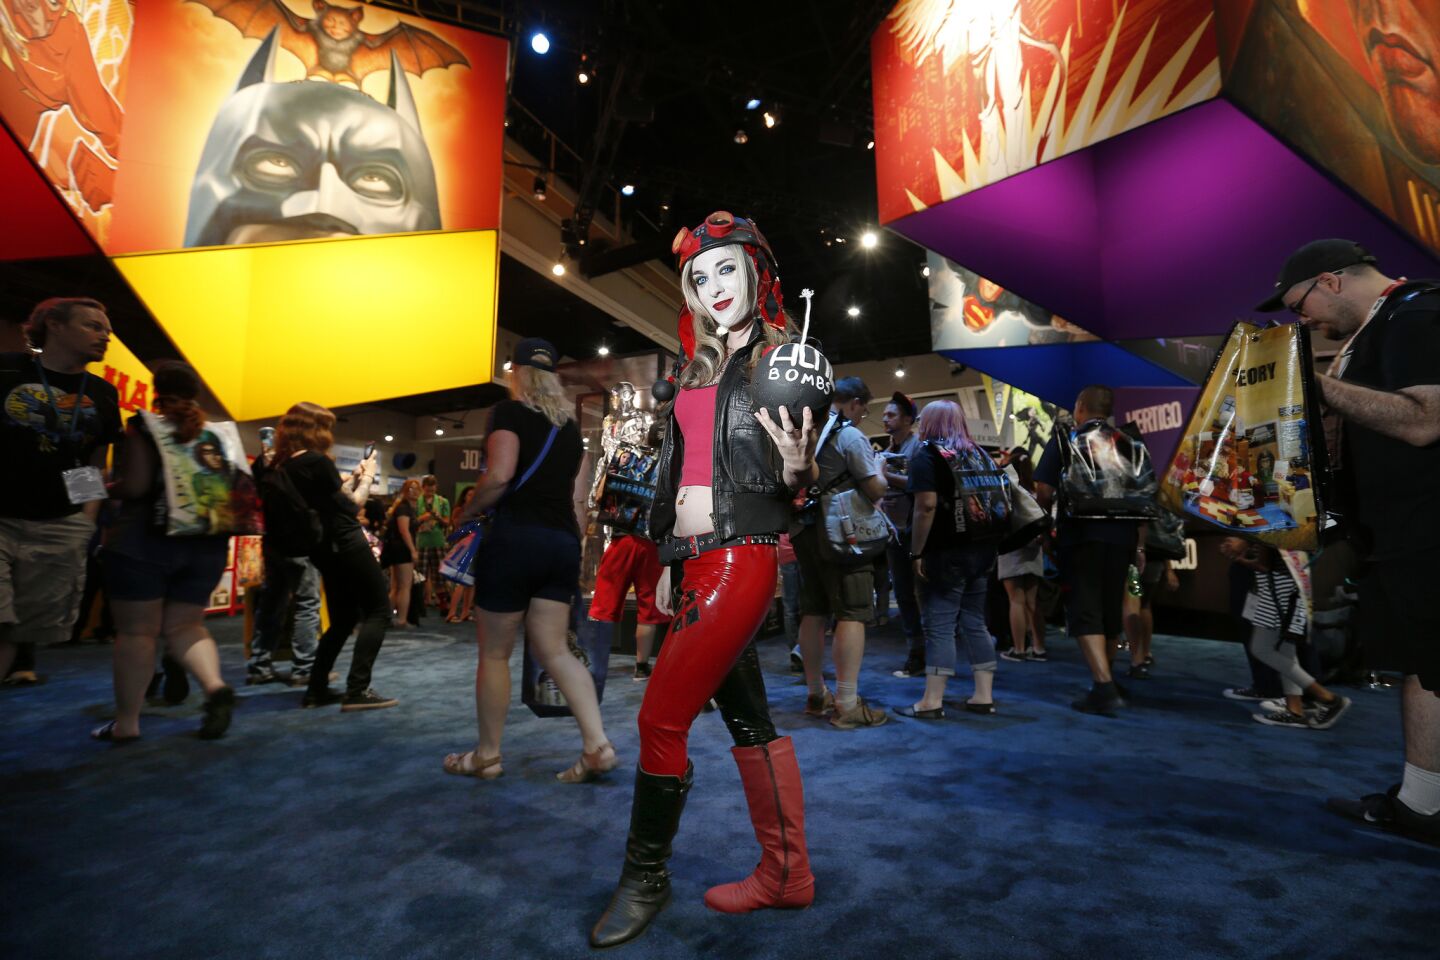 Amanda Levine of North Hollywood is dressed as Harley Quinn while viewing the DC Comics display.